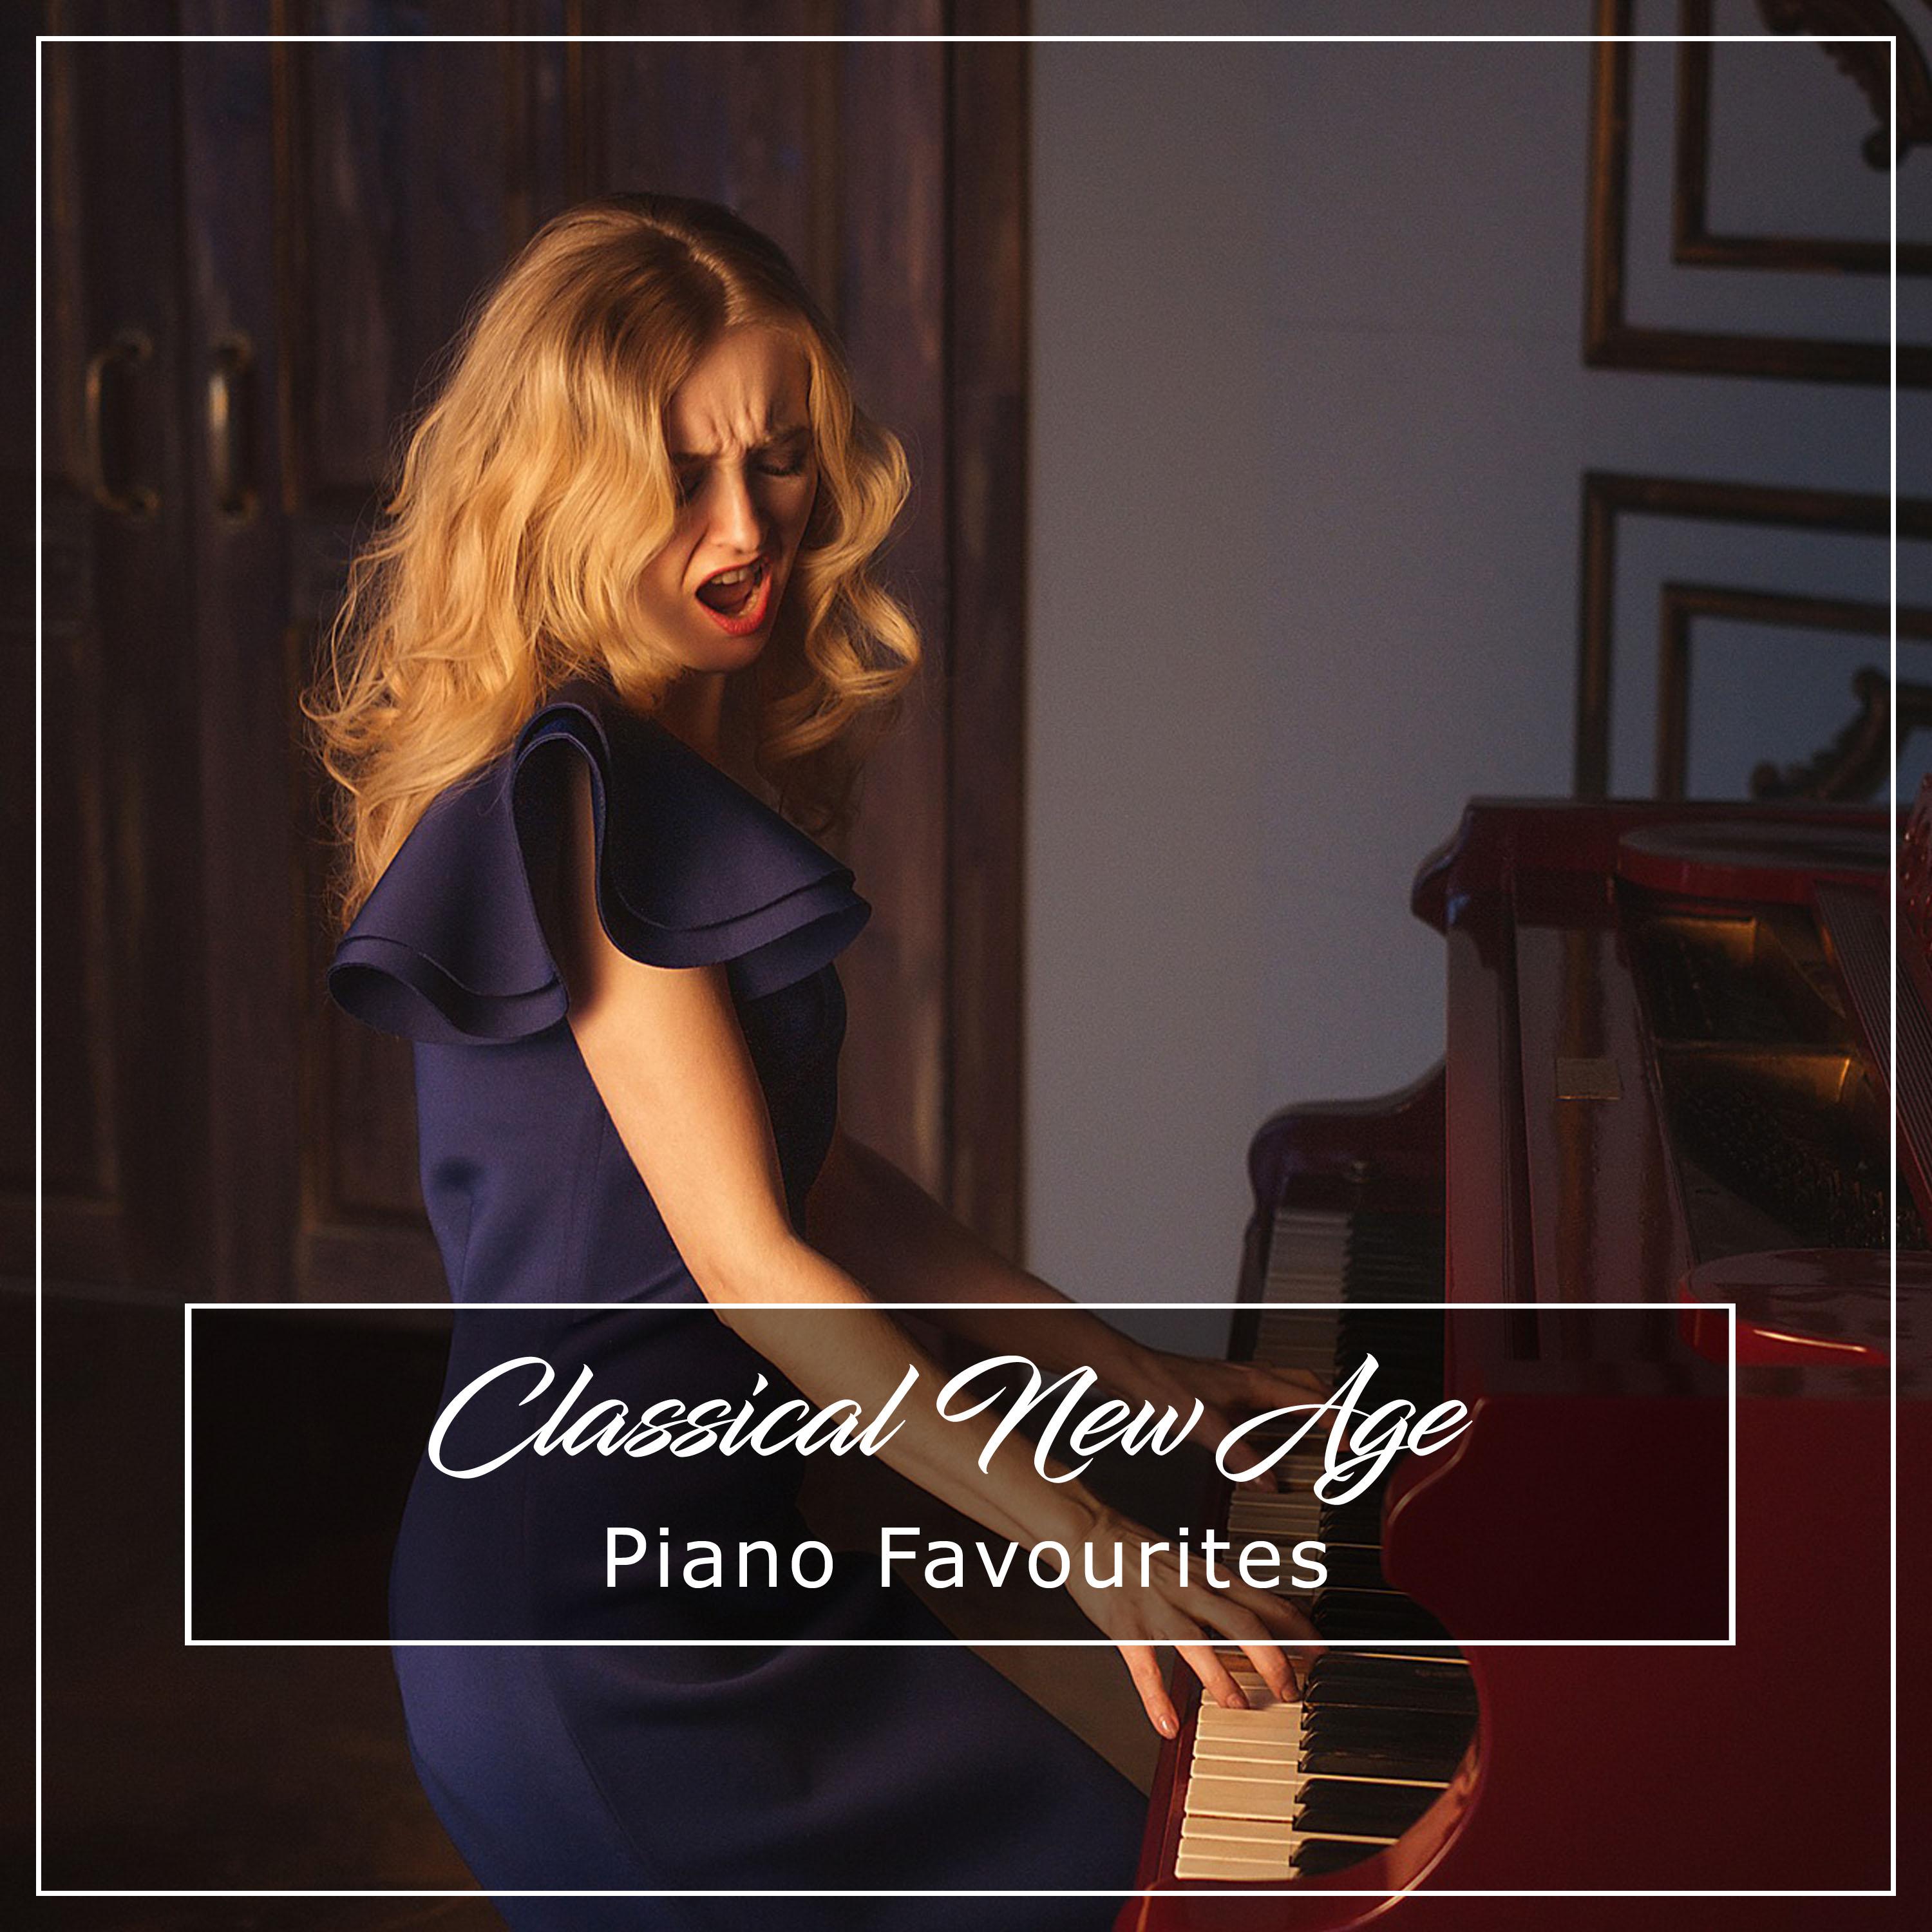 12 Classical New Age Piano Favourites